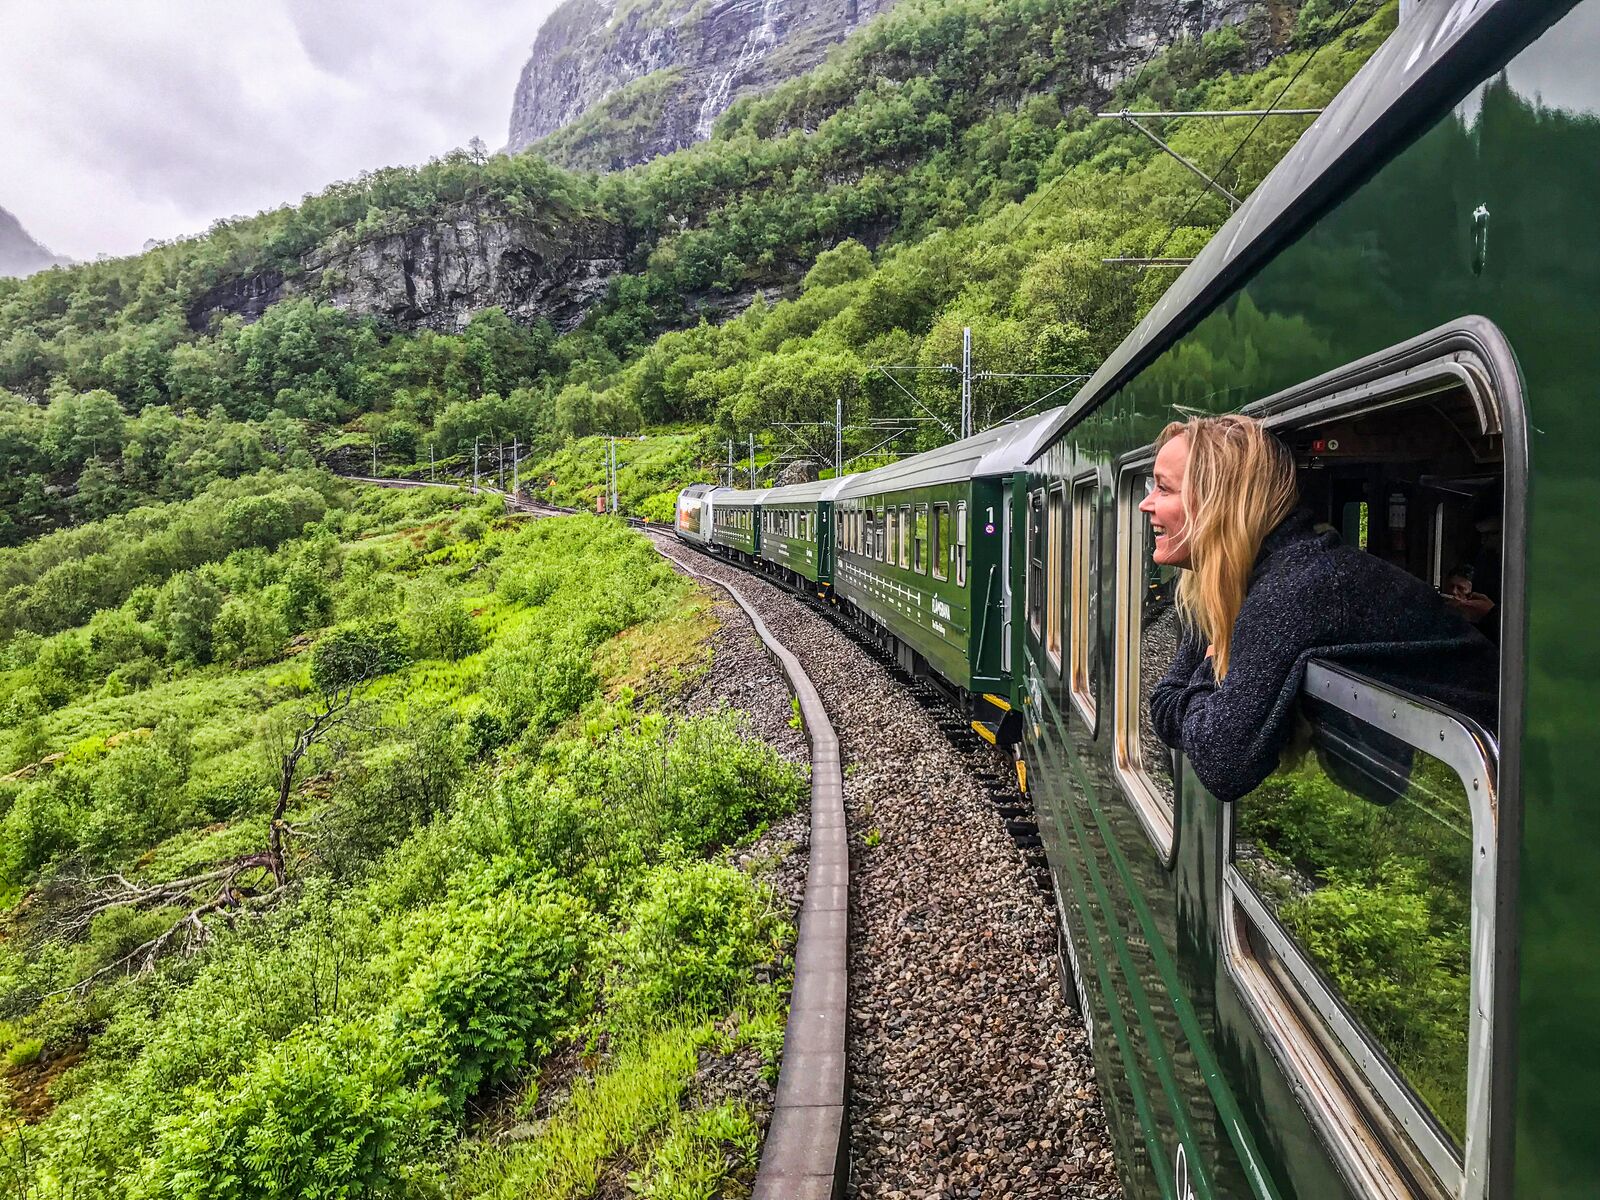 http://res.cloudinary.com/simpleview/image/upload/v1635406762/clients/norway/large_Travelling_with_train_Fla_m_Torild_Moland_TravelStock_388b4c82-a719-4ec1-bfc2-ce3c26e9c4ad.jpg